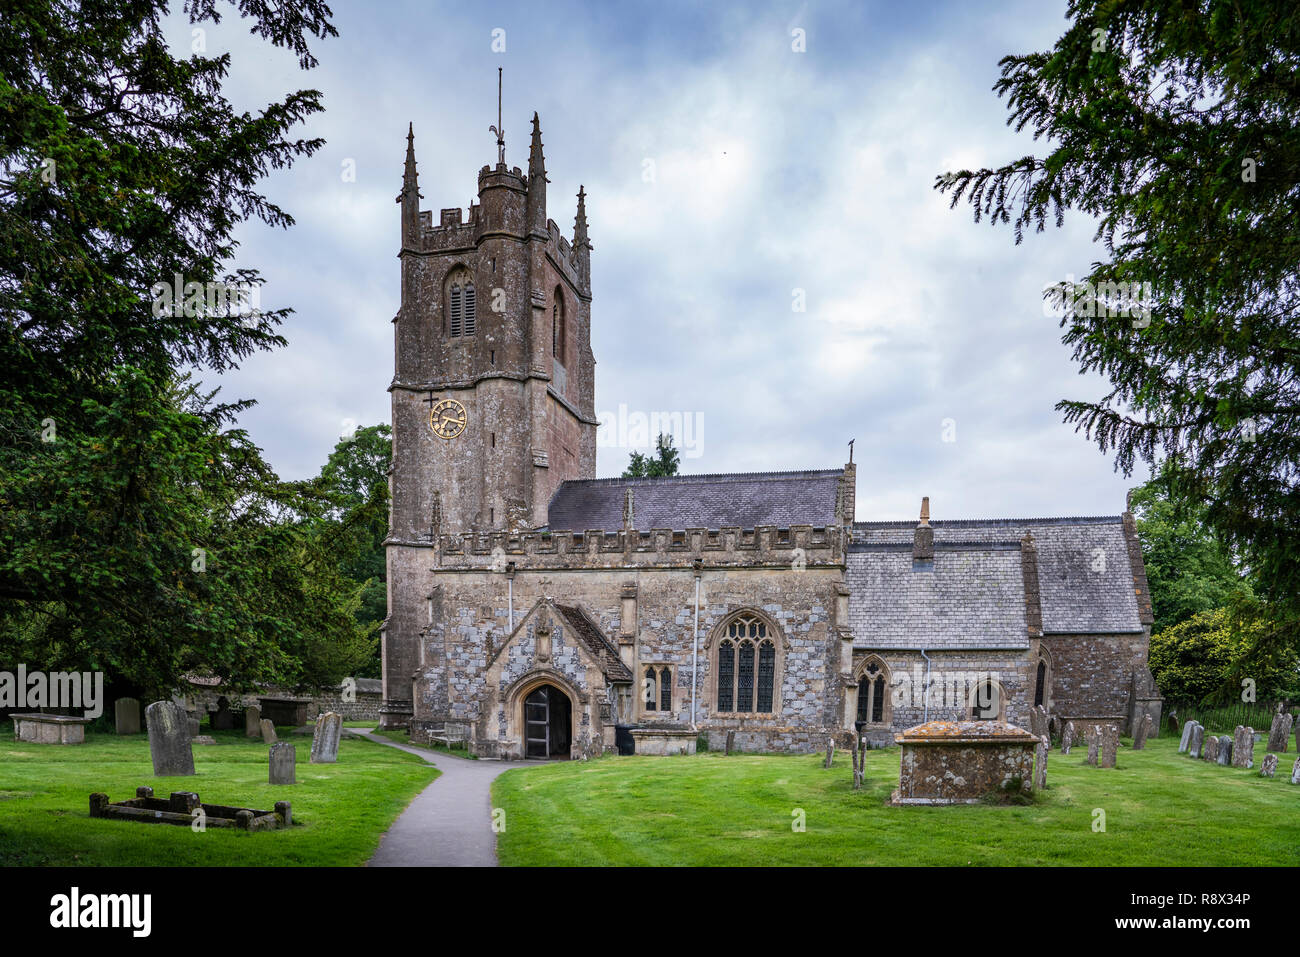 Ther historic St. James' Anglican Church in the village of Avebury, Wiltshire, England, Europe. Stock Photo